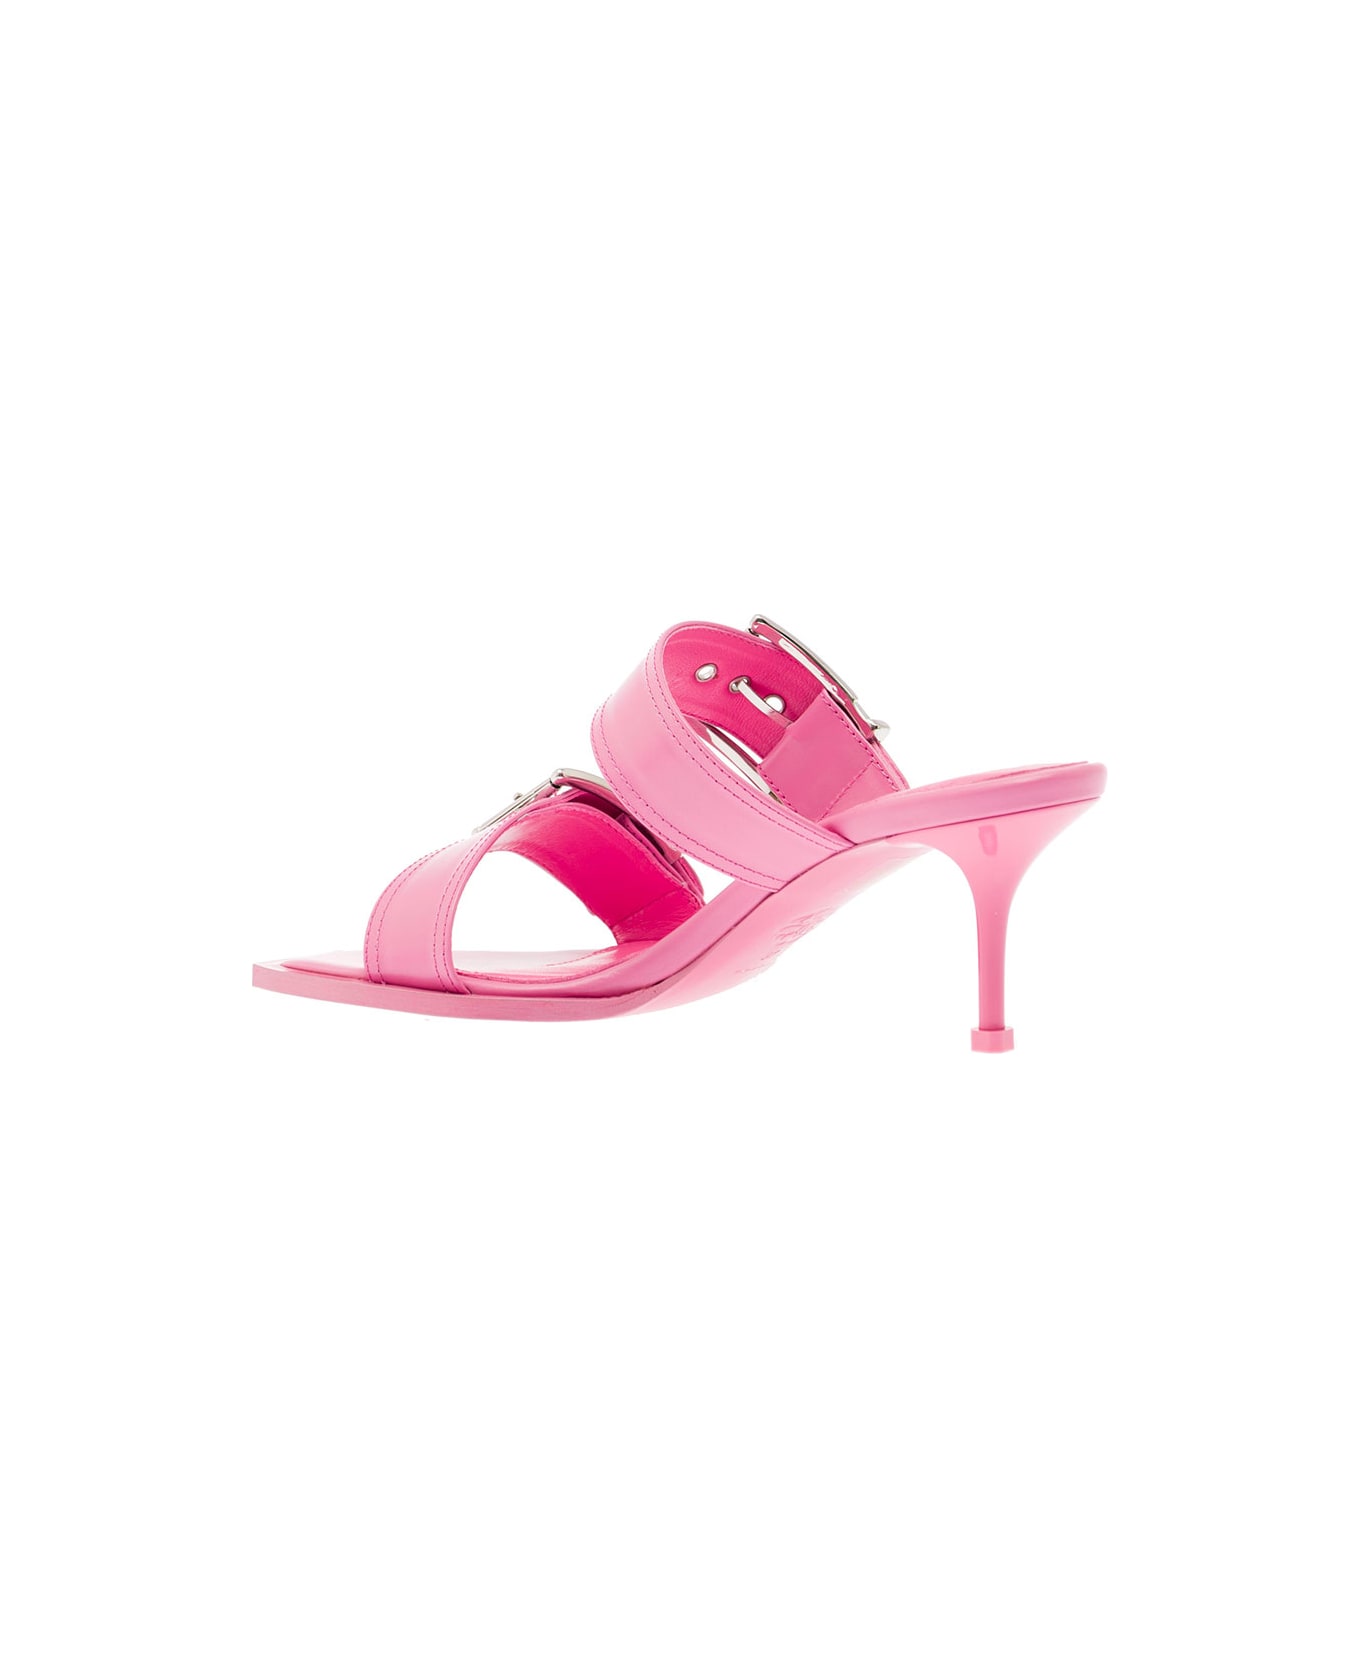 Alexander McQueen 'punk' Pink Sandals With Double Strap And Metal Buckles In Leather Woman - Pink サンダル